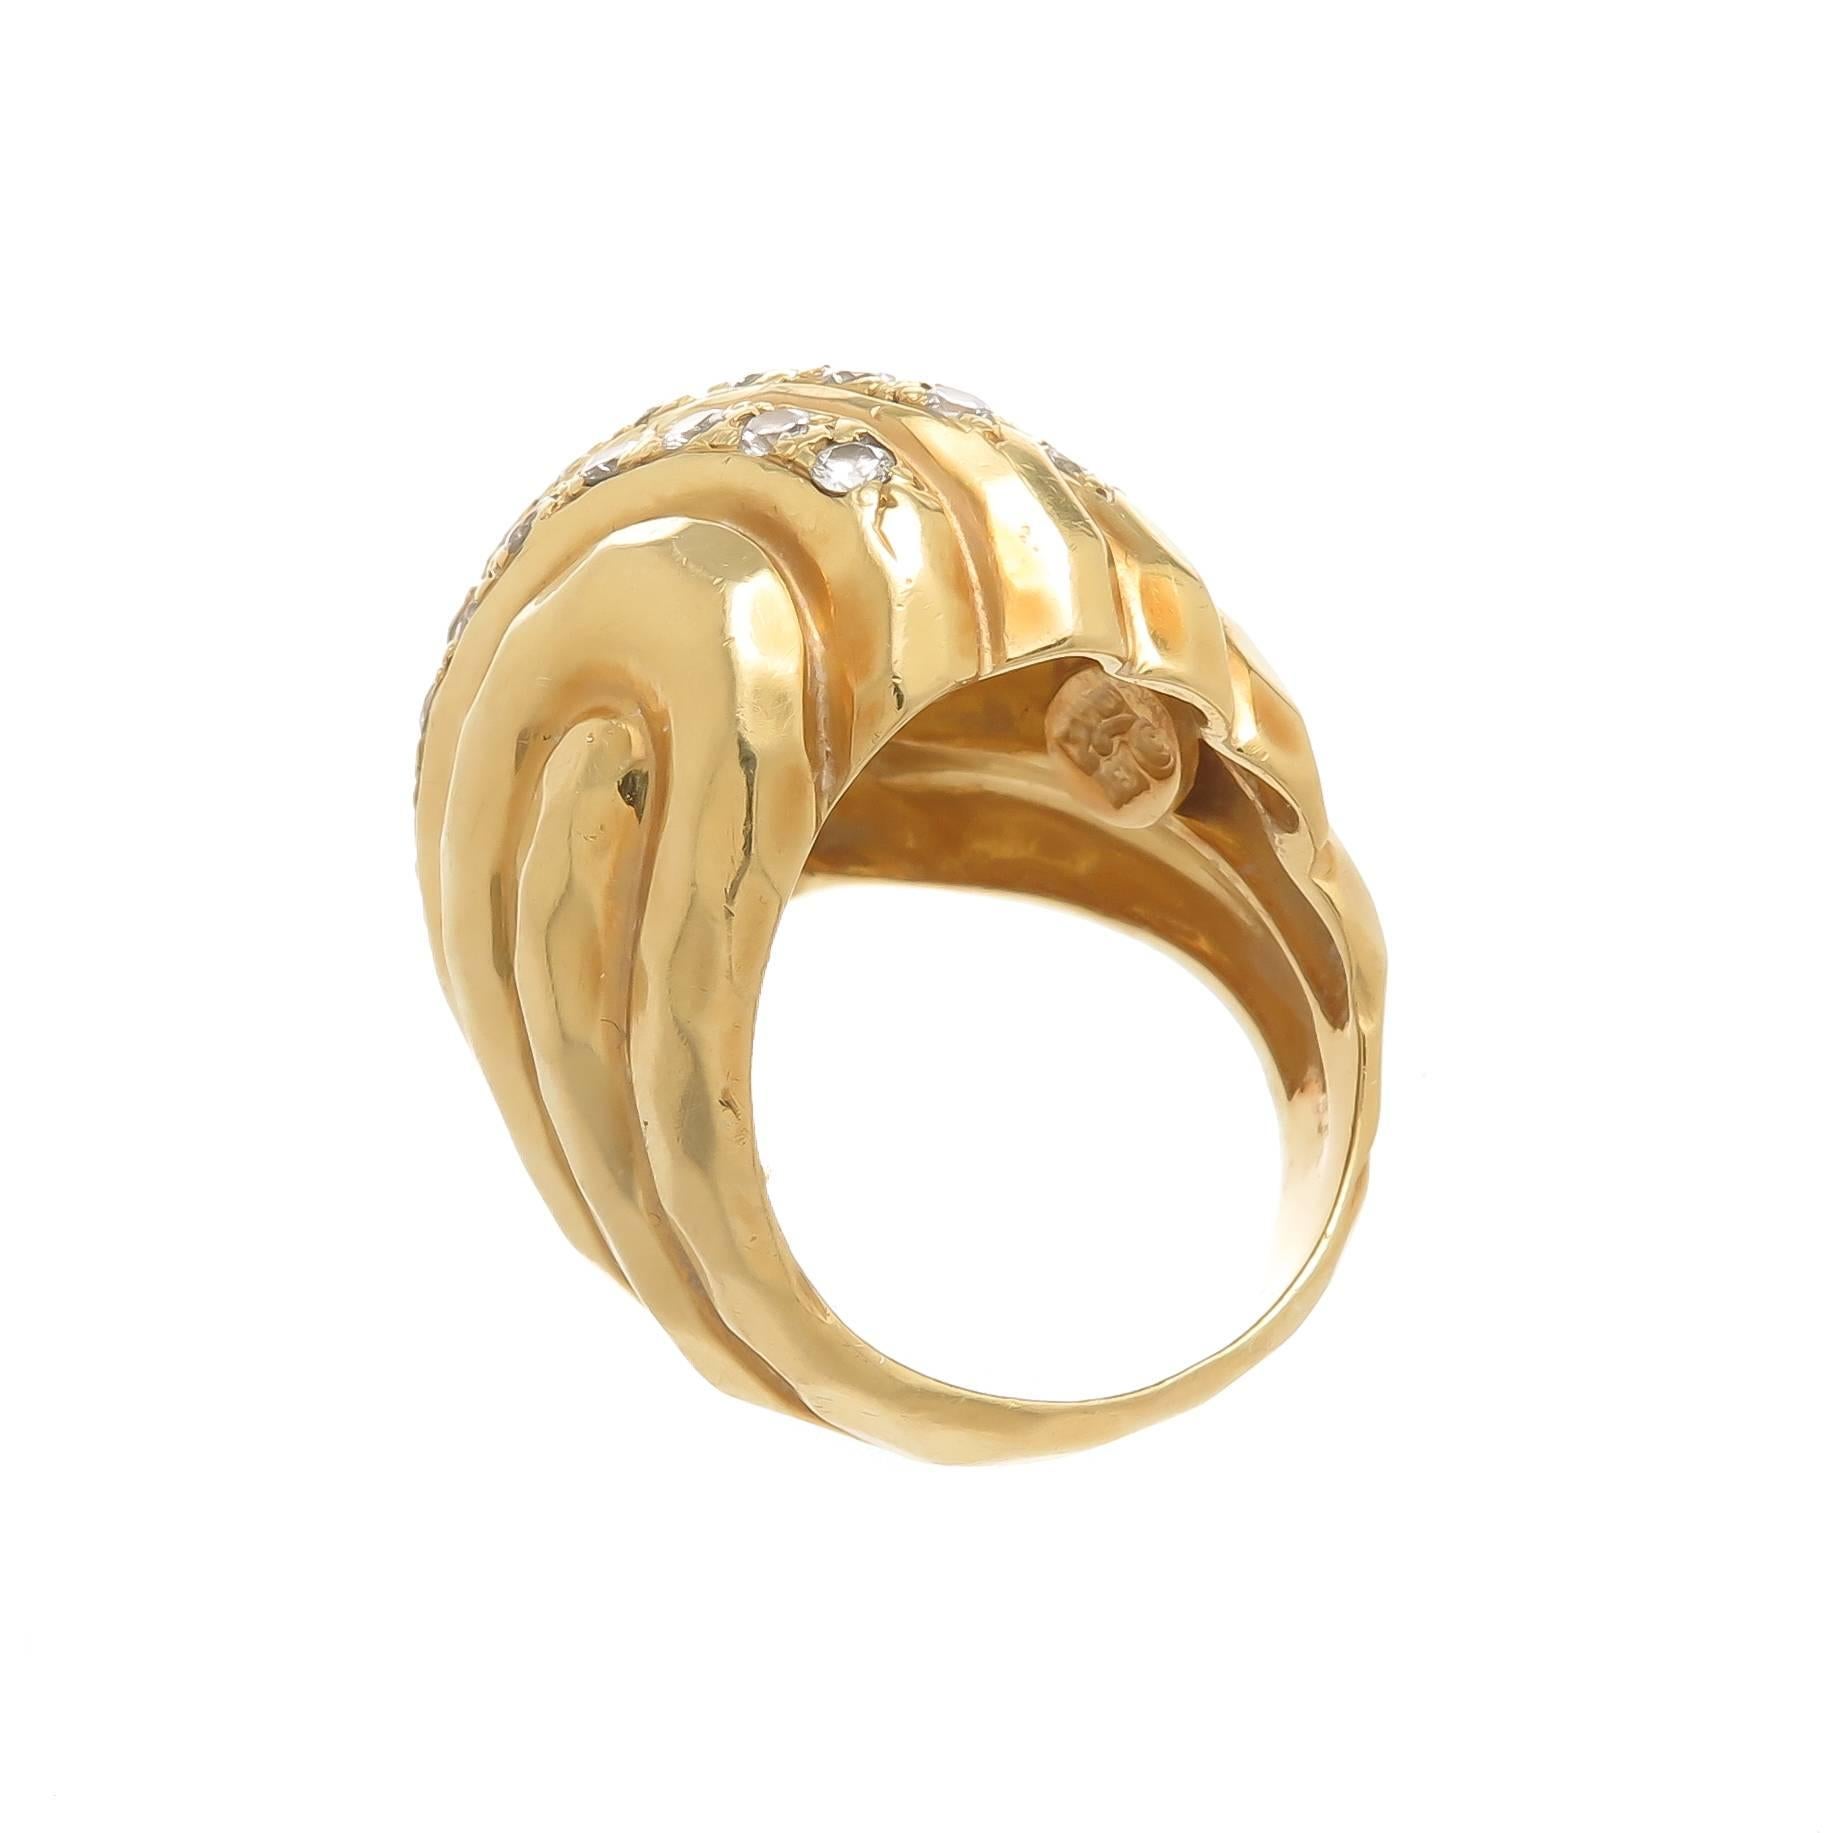 Circa 1990s Henry Dunay 18K Yellow Gold Domed Ring with Classic Dunay Hammered Finish. The ring measures 1 inch in length across the top and 7/8 inch wide. Set with 3 rows of Round Brilliant cut Diamonds totaling 1 Carat and Grade as G in Color and